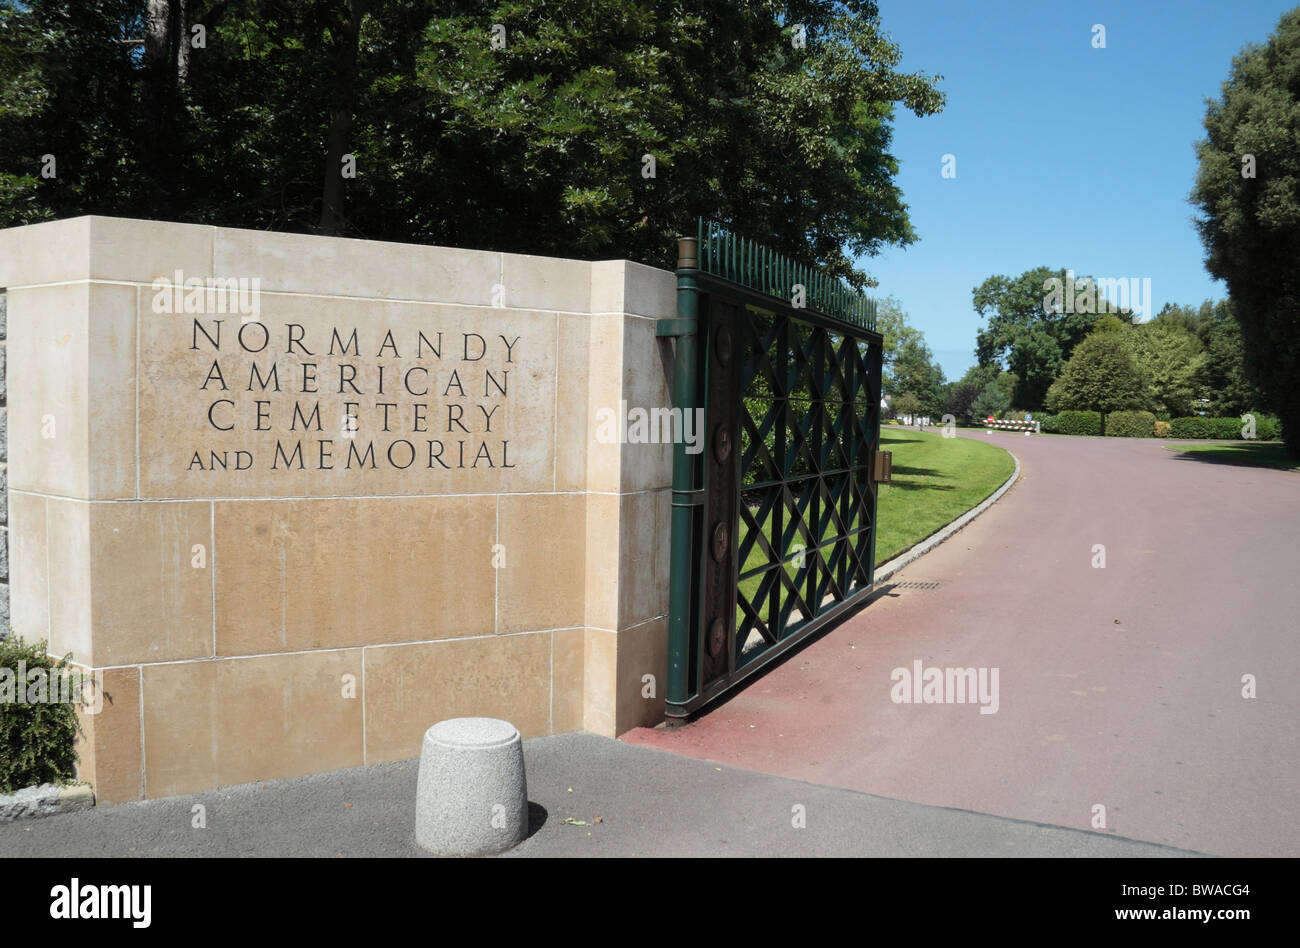 The entrance gate to the Normandy American Cemetery and Memorial, Colleville-sur-Mer, France. Stock Photo